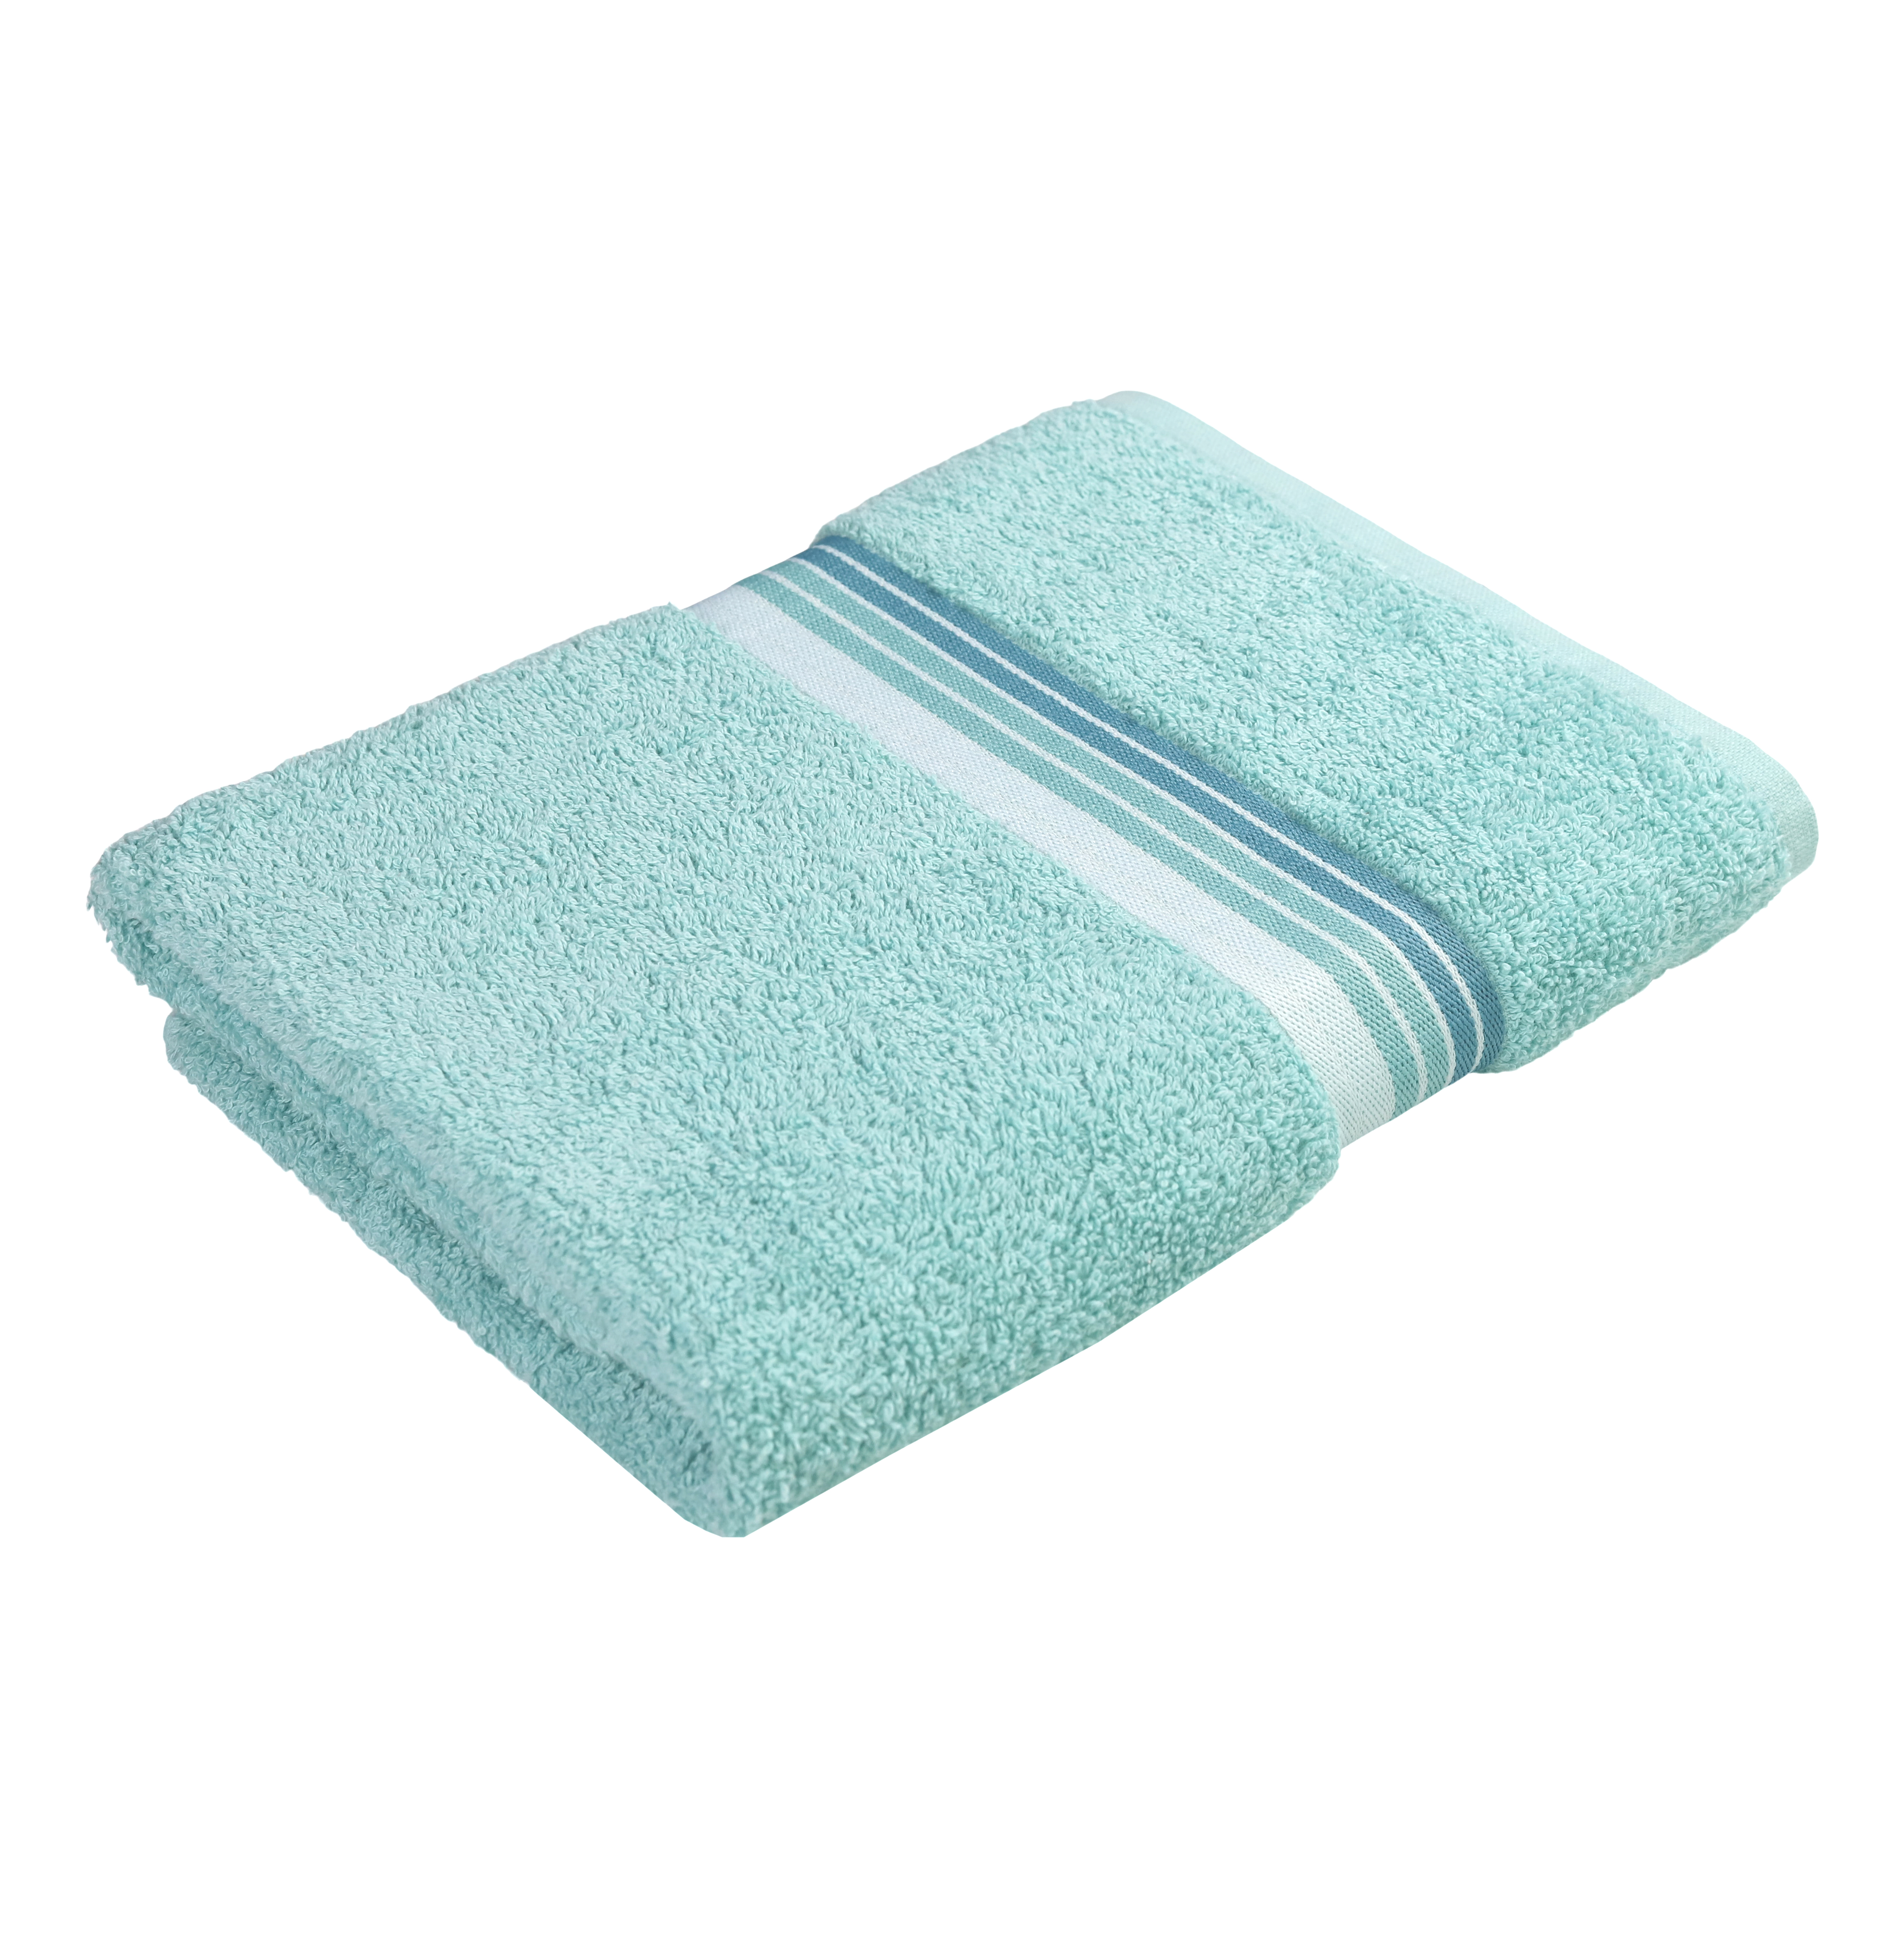 Mainstays Ombre Stripe Bath Towel, Clearly Aqua - image 2 of 9